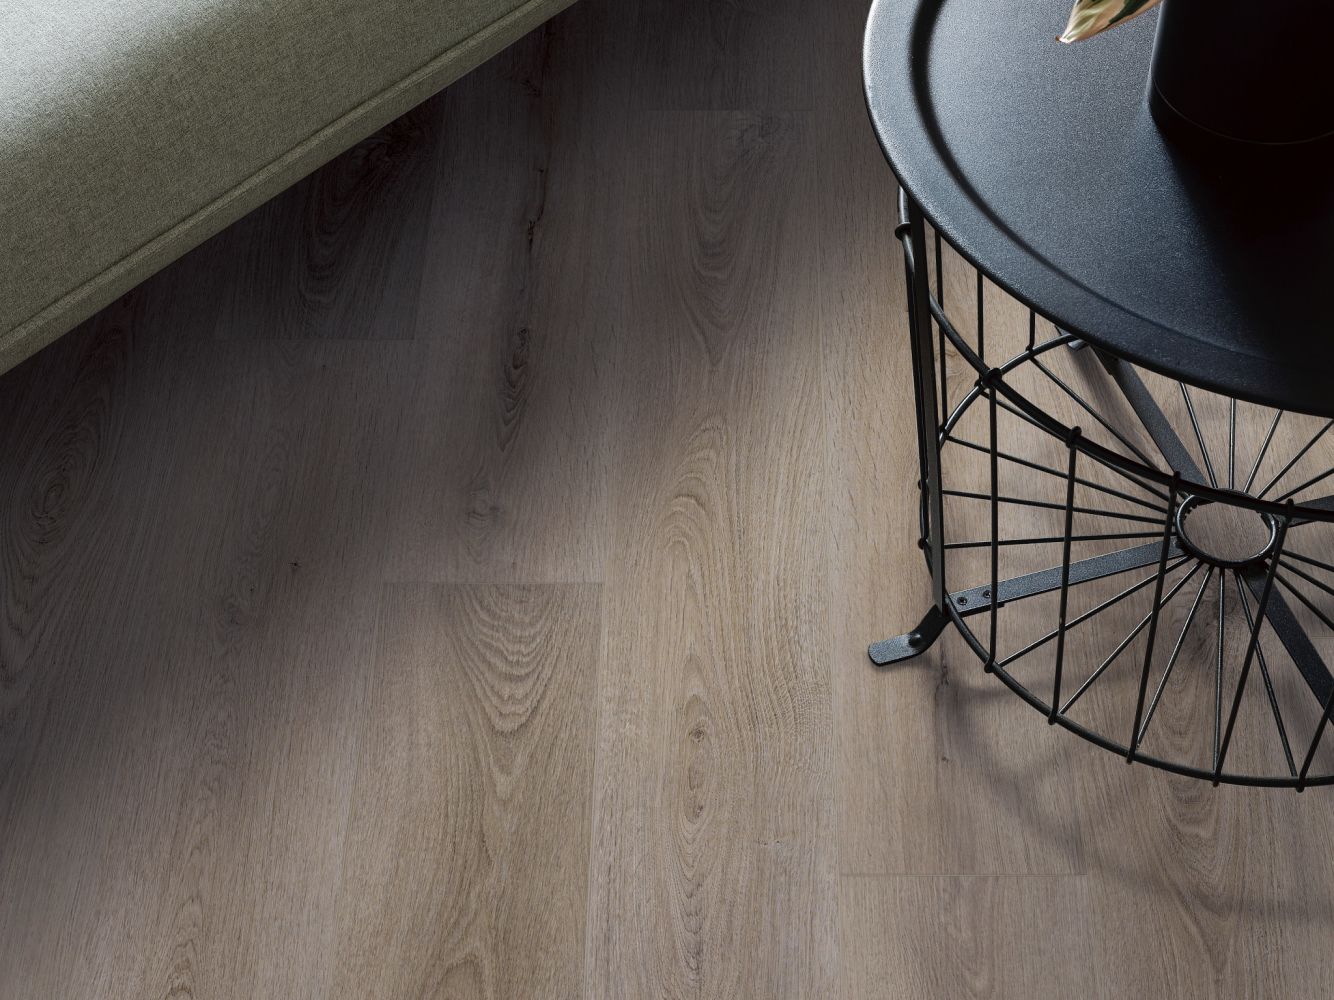 Shaw Floors Resilient Residential Paladin Plus Ashen Brown 05219_0278V